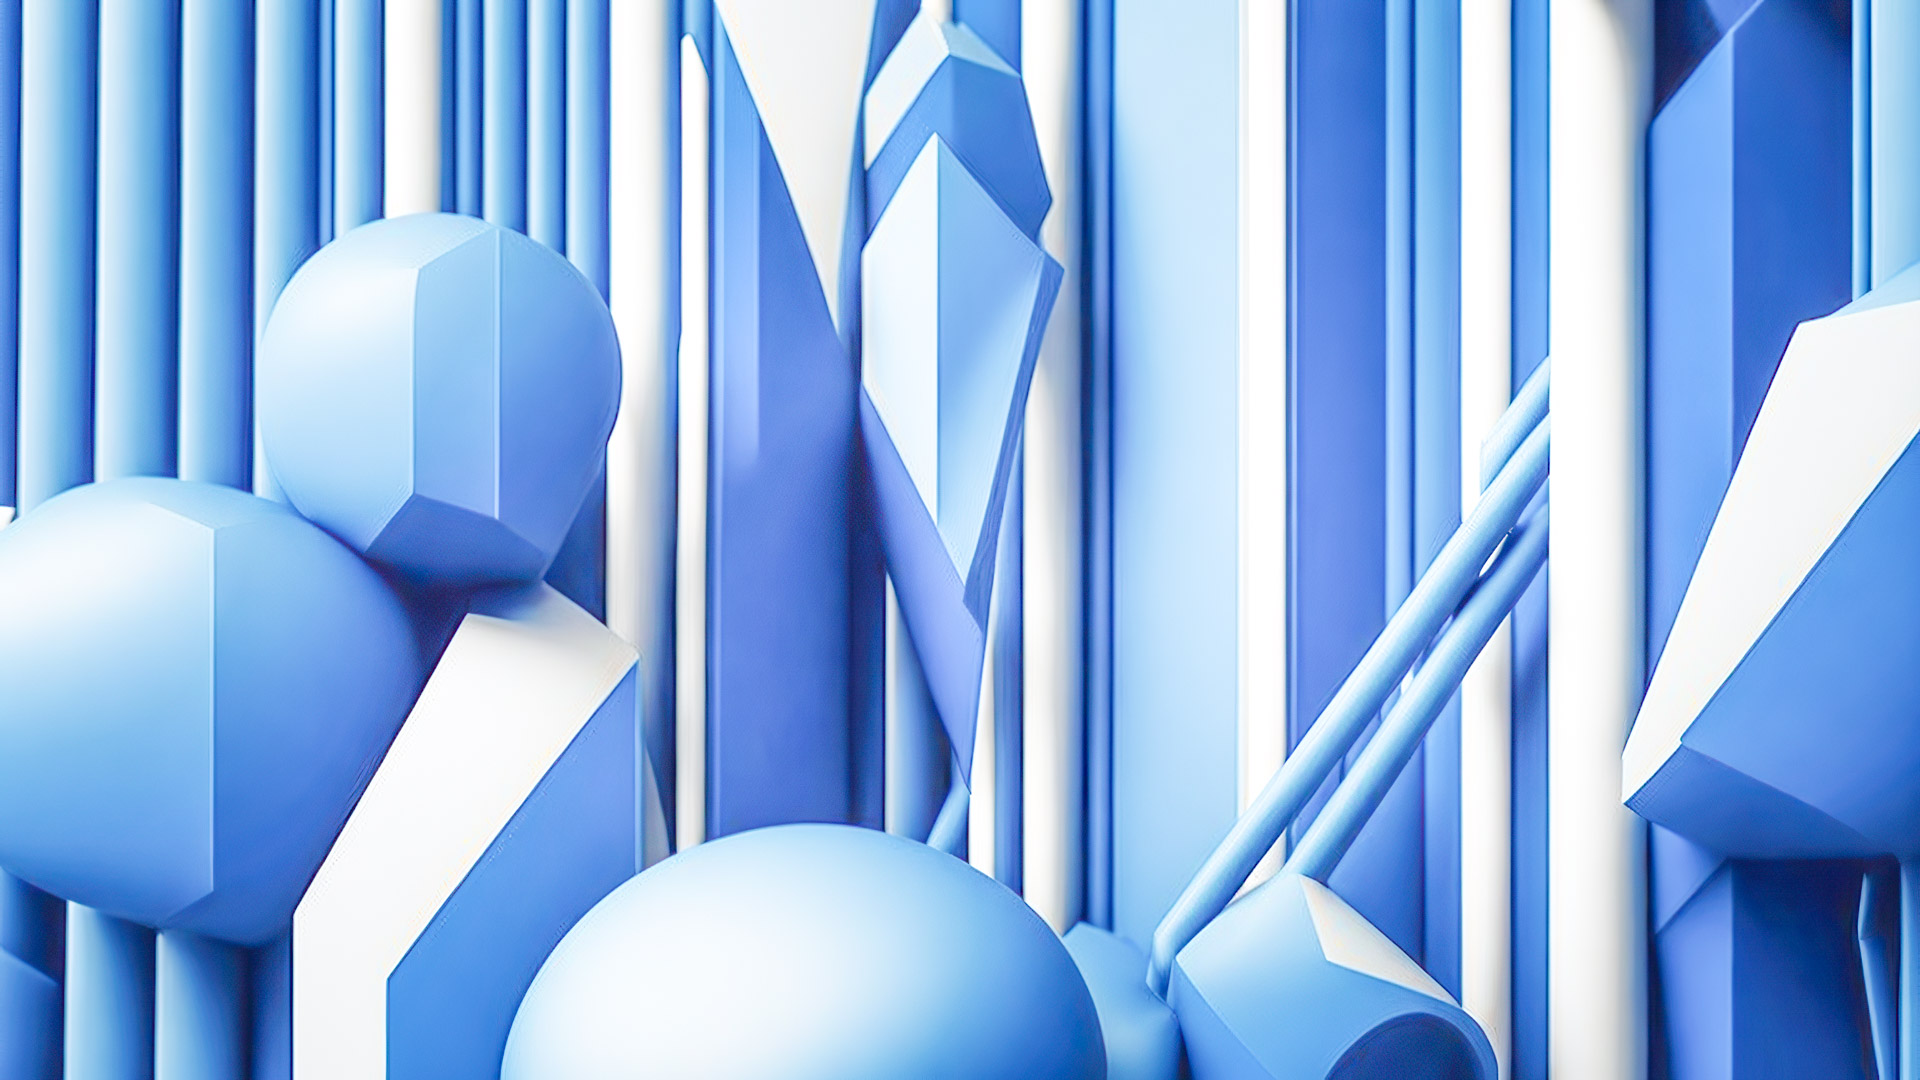 Experience the captivating allure of our HD wallpaper for PC, highlighting an arrangement of blue poles for a dynamic and visually arresting composition.